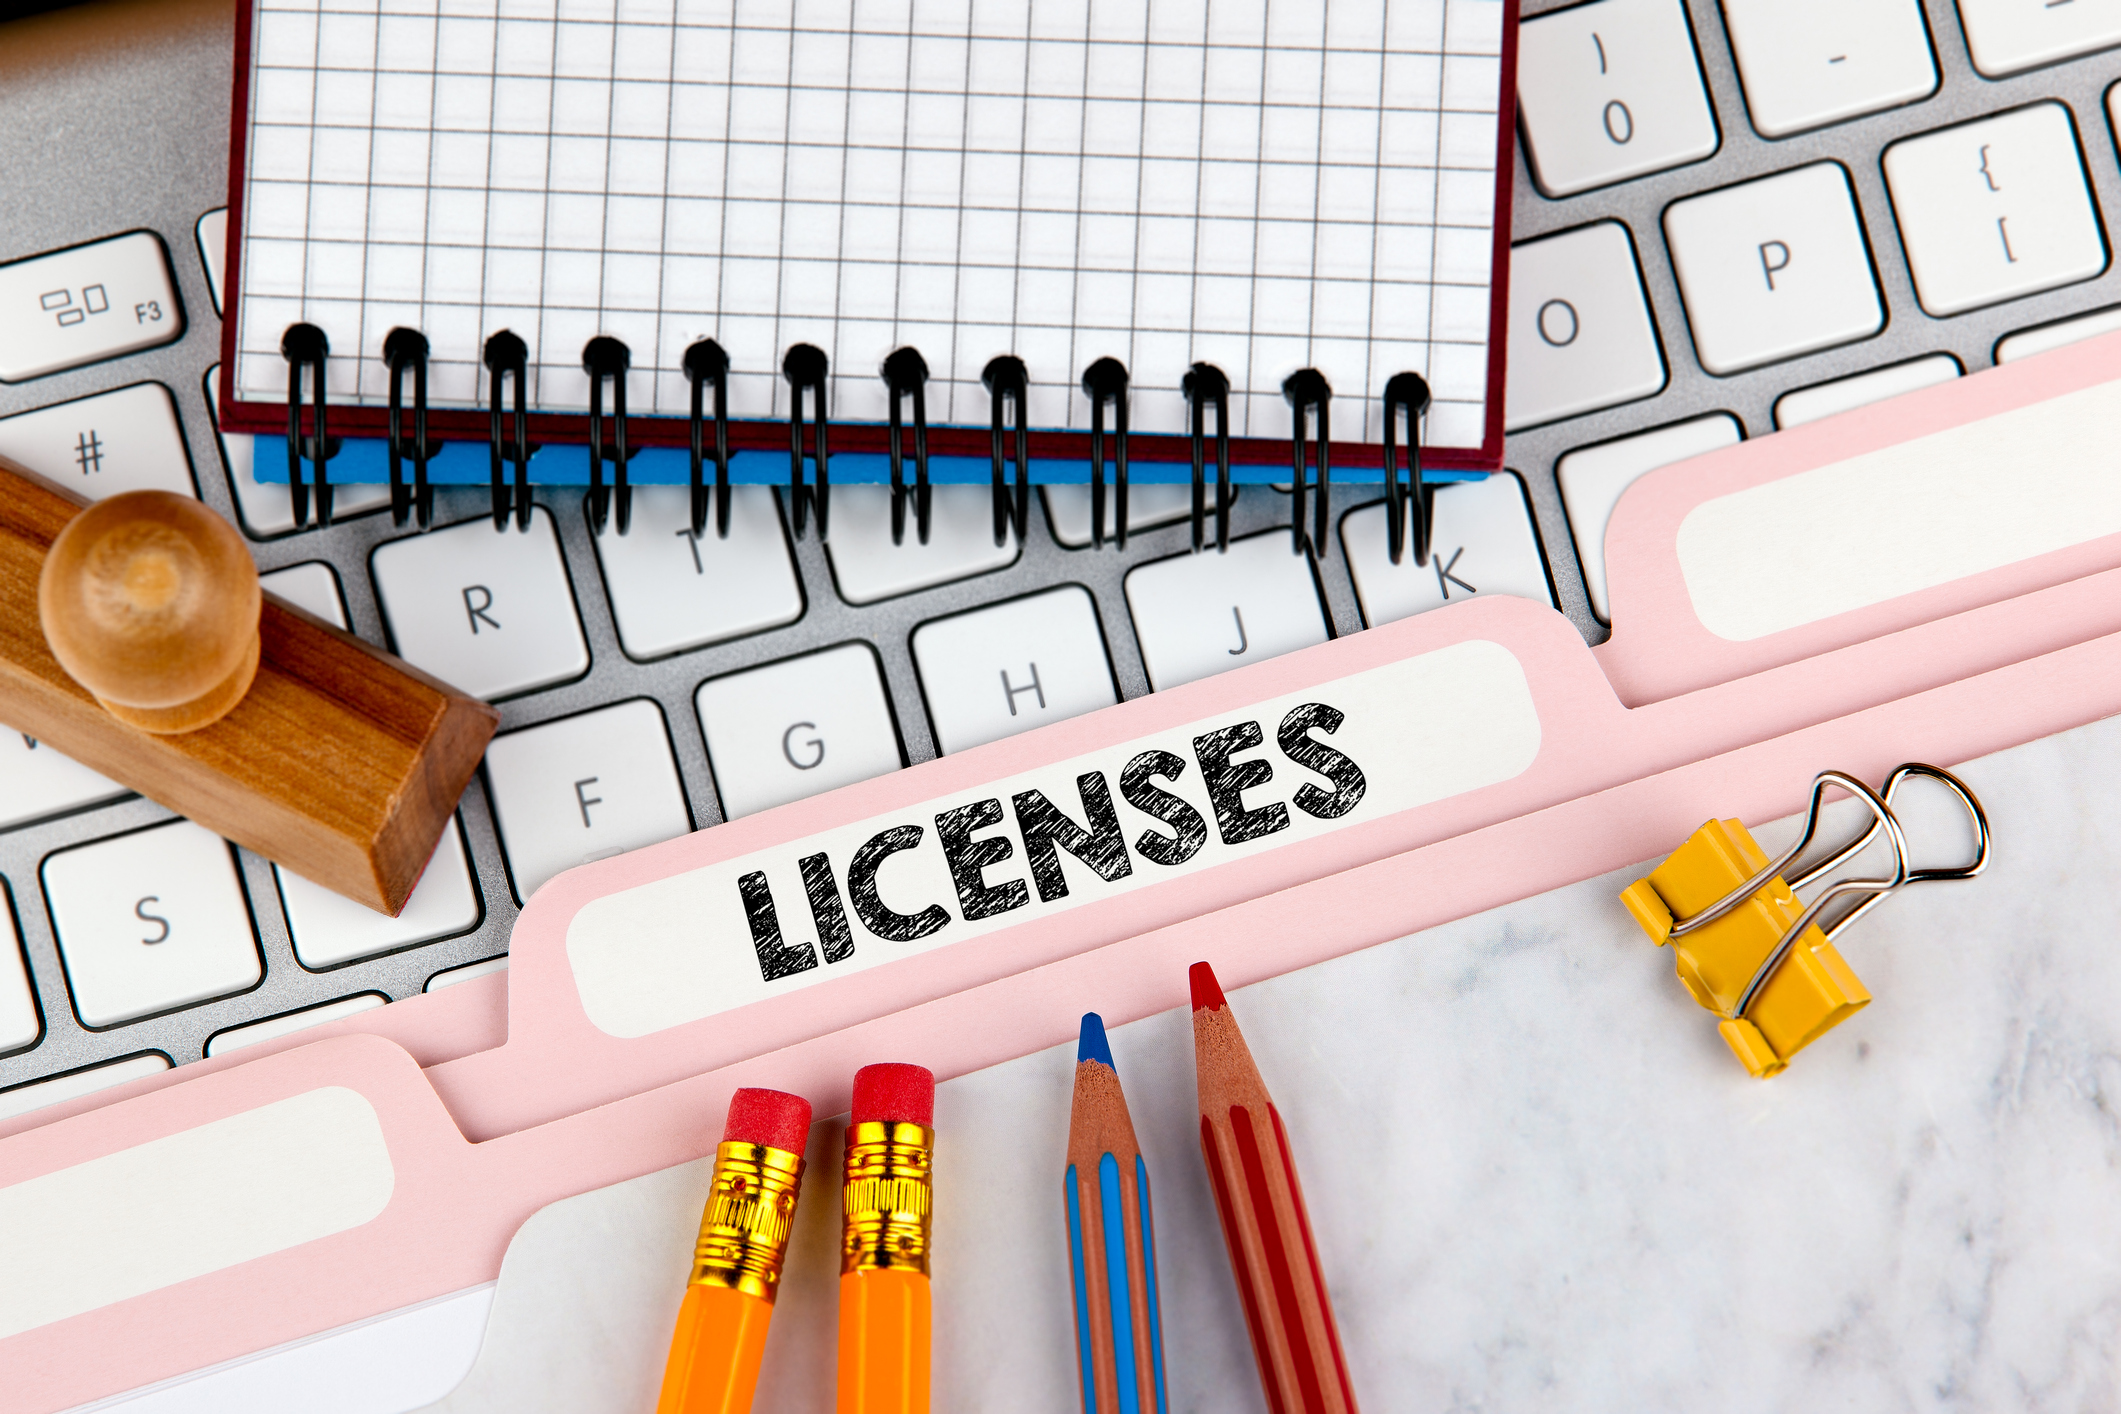 Selective licensing schemes . Central Housing Group